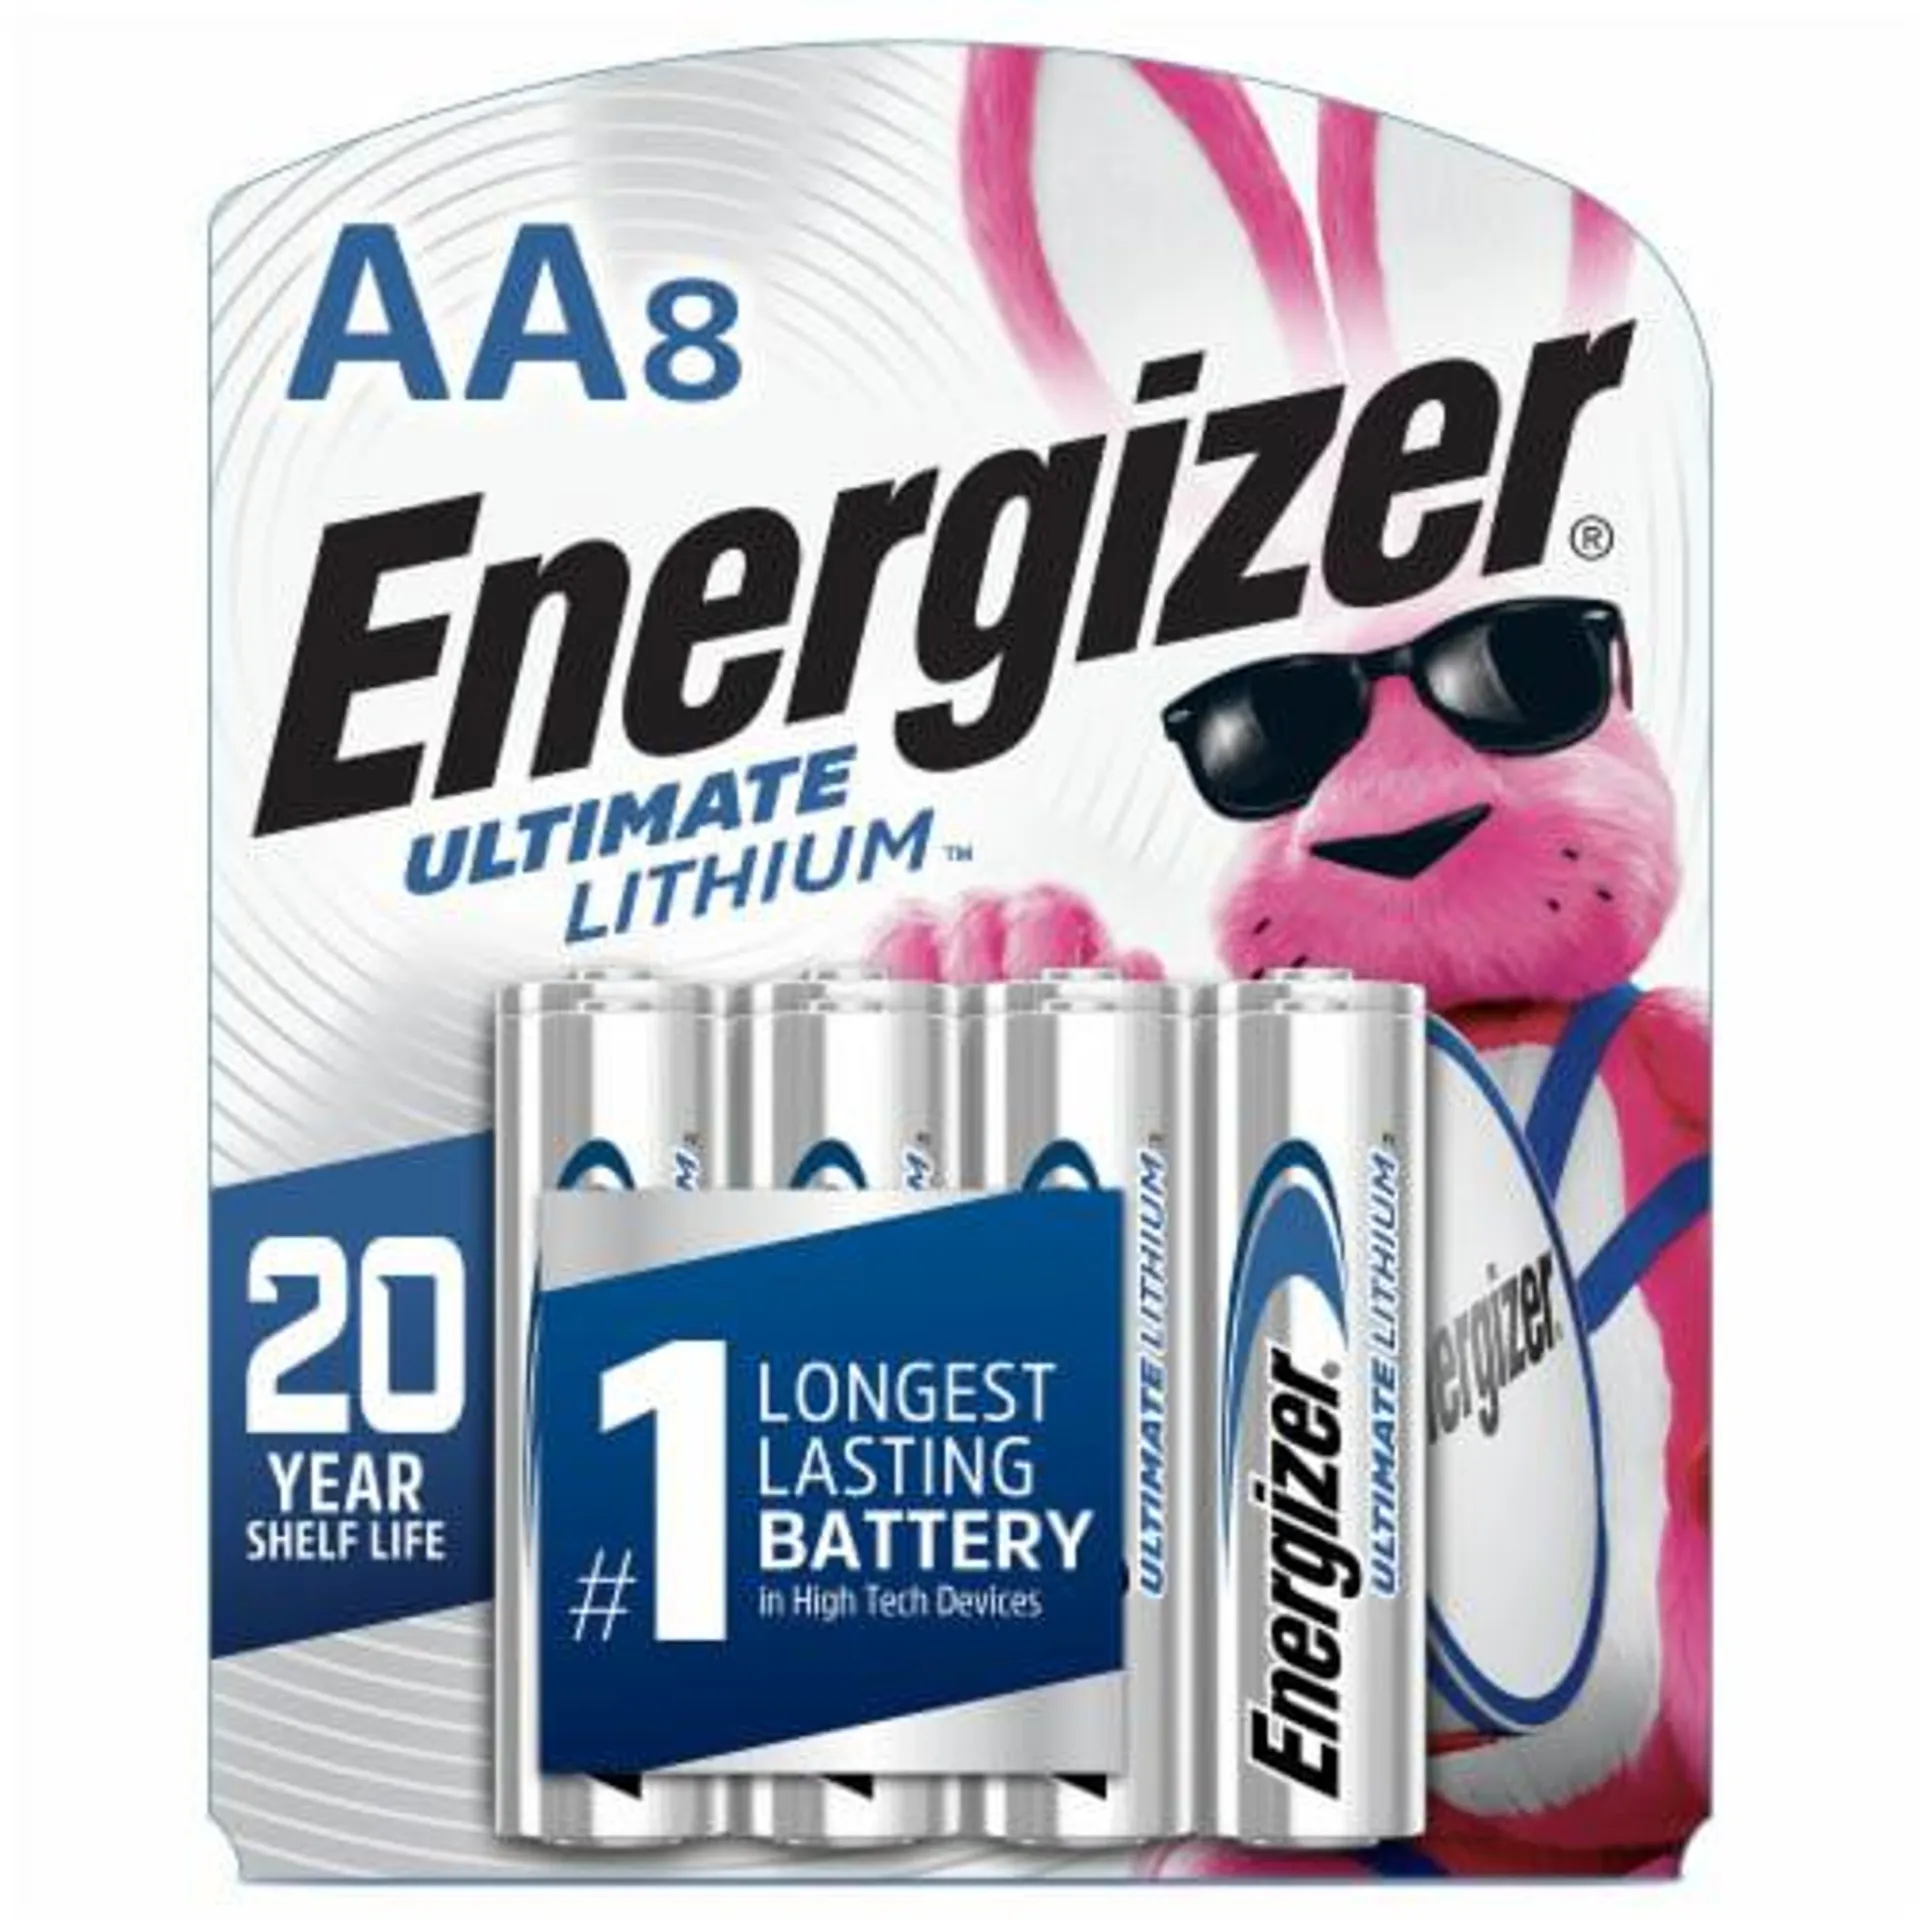 Energizer® Ultimate Lithium™ AA Batteries